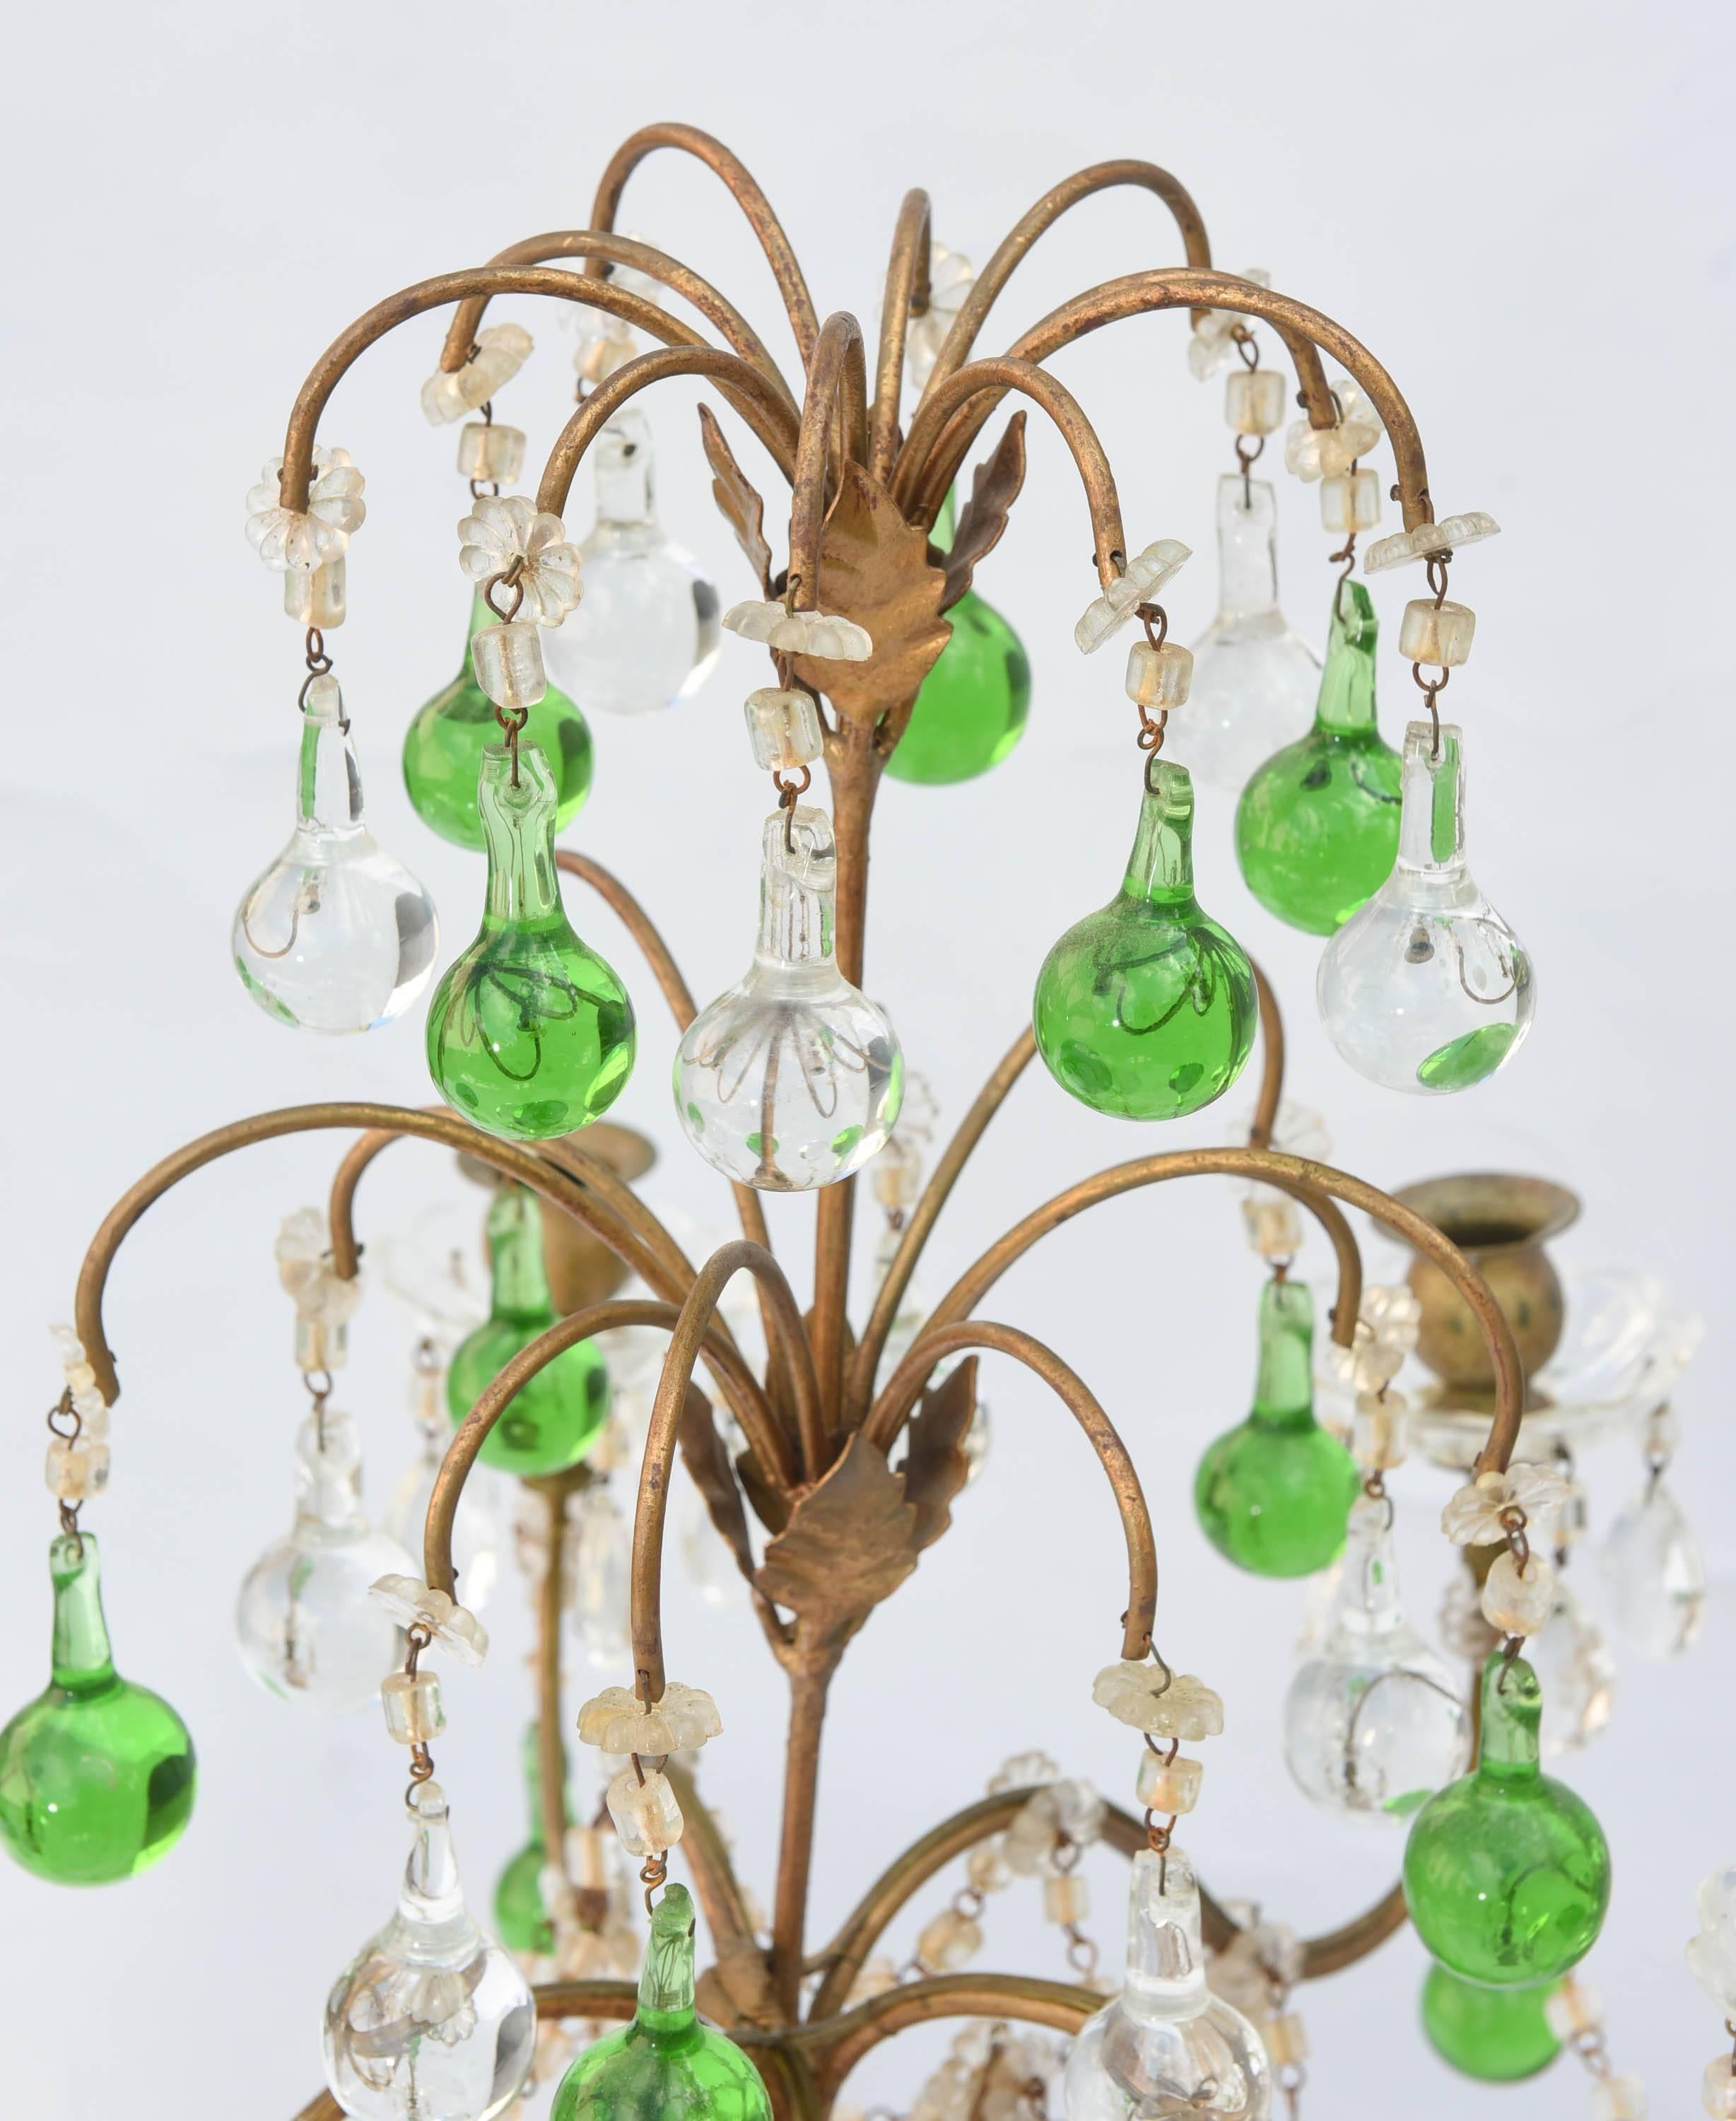 Pair of girandoles, each having center column of painted and parcel gilt turned wood with iron, five scrolling candlearms draped in crystal beads and terminating in glass bobeches; suspended with green and clear crystal balls.

Stock ID: D4681